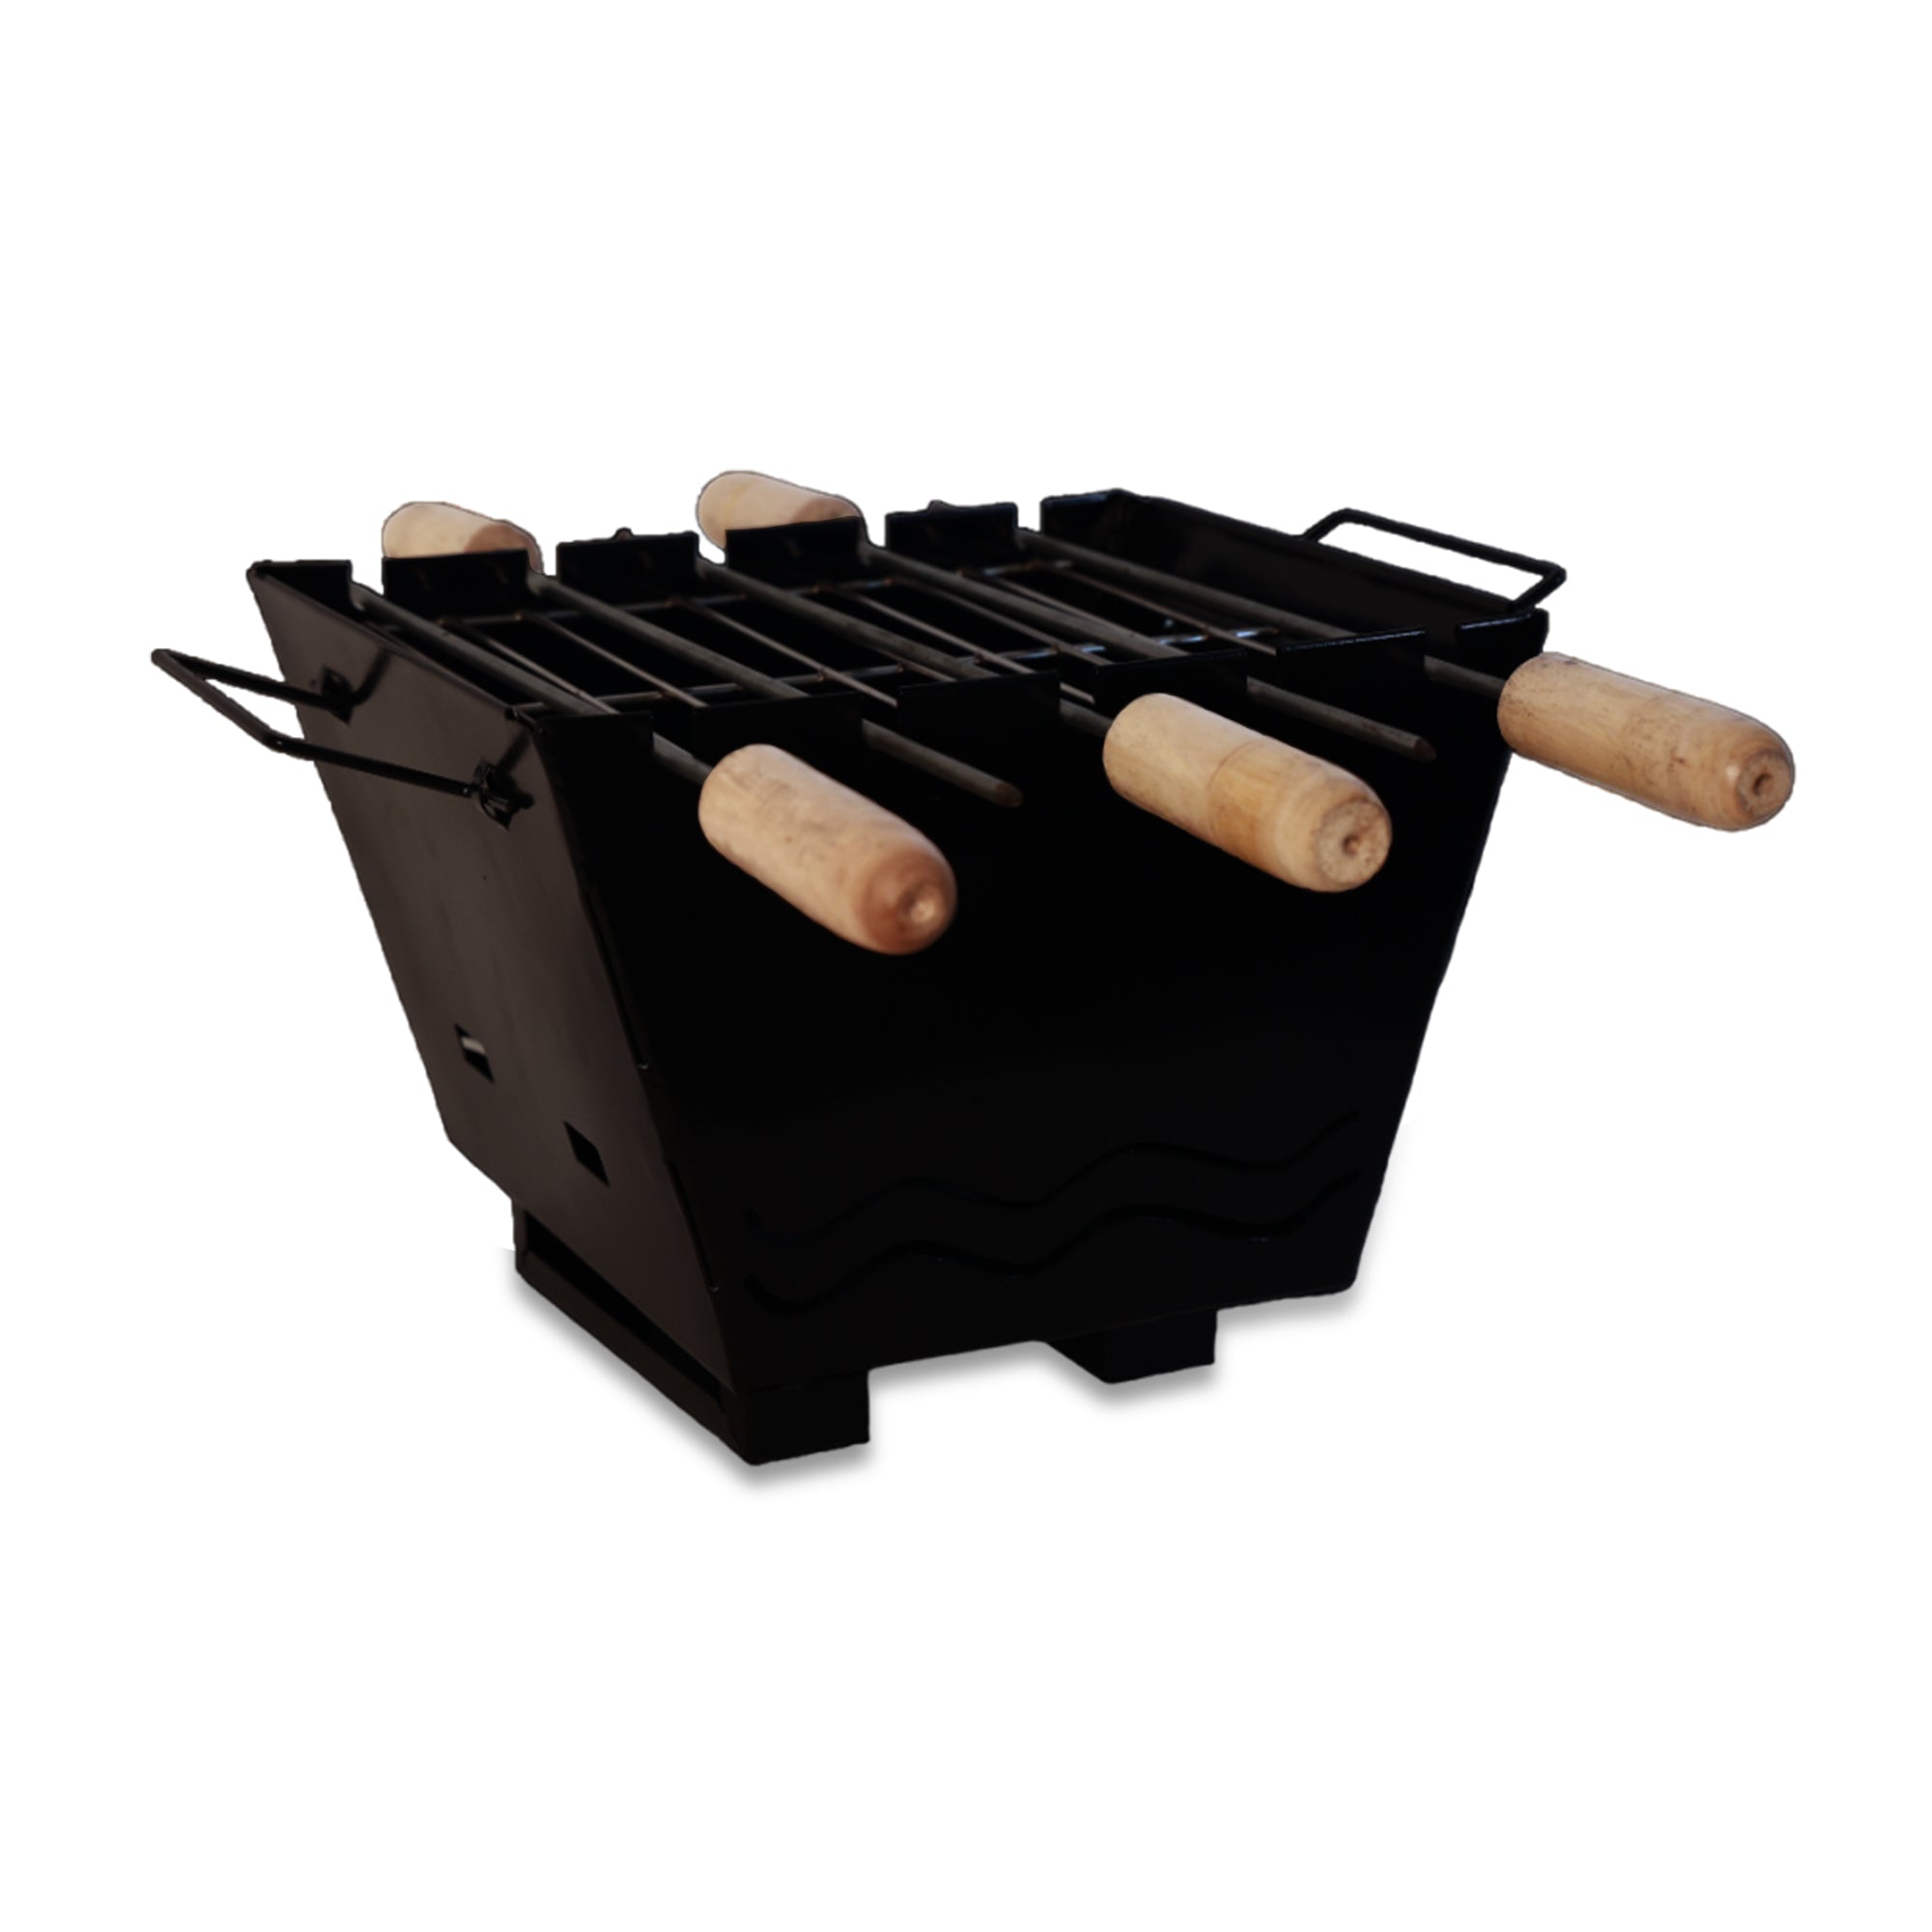 GCP Products GCP-US-576604 28Pc Exclusive Bbq Grill Accessories In Carrying  Bag For Birthday Christmas Grilling Gifts - Premium Grill Utensils Set With  …